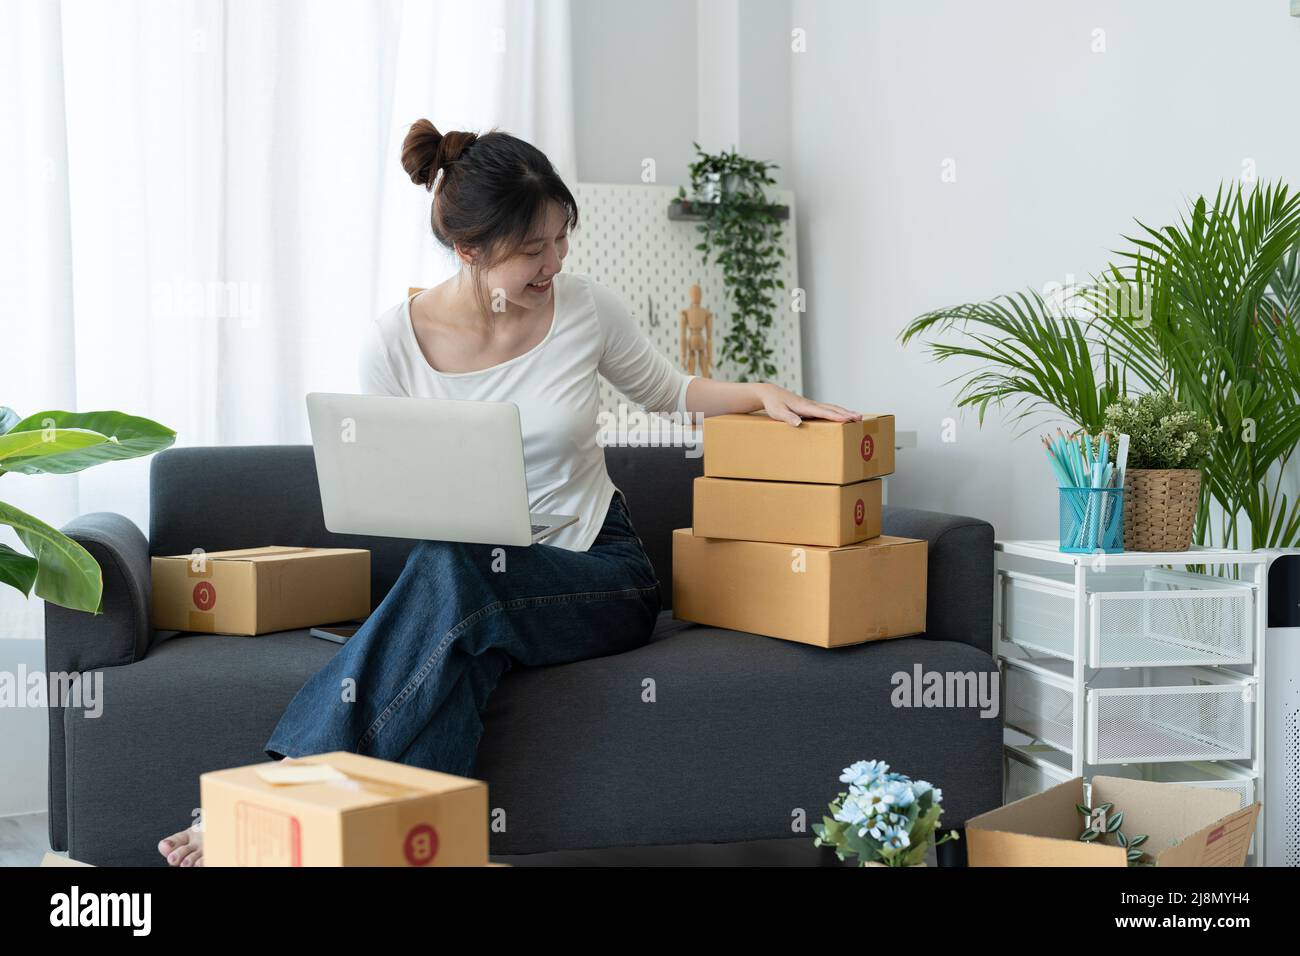 Starting Small business entrepreneur SME freelance, Portrait young woman working at home office, box,,laptop, online, marketing, packaging, delivery Stock Photo